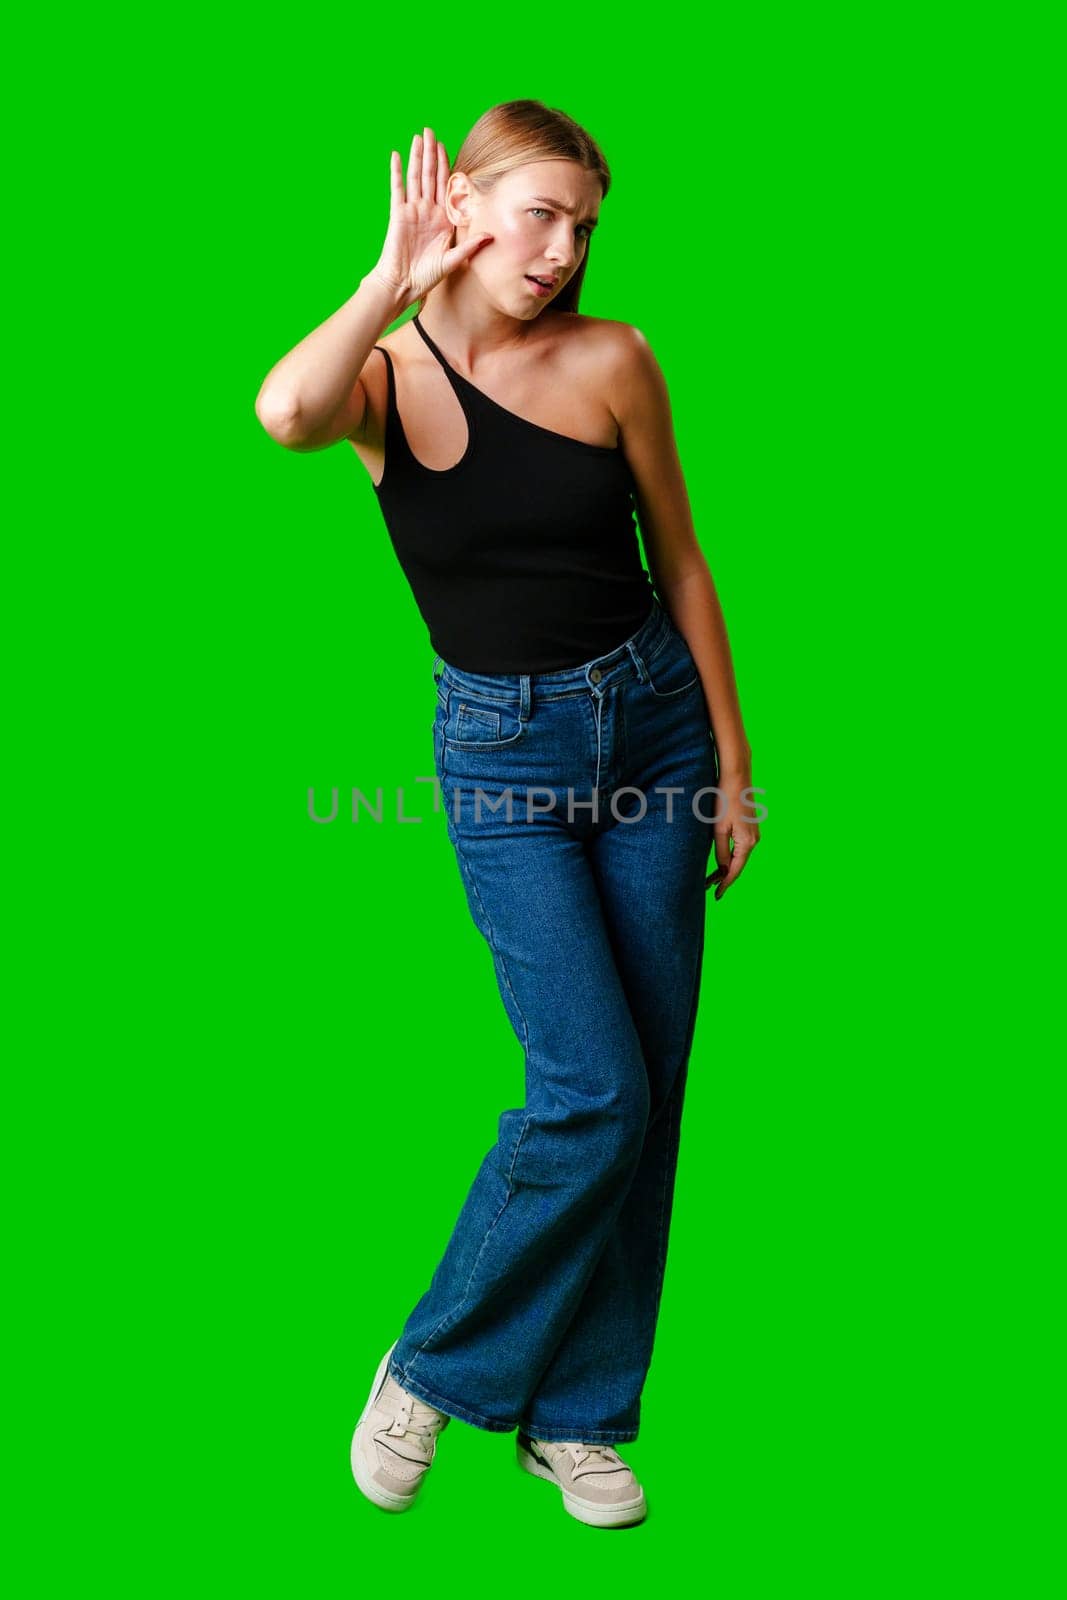 Young Woman in Black Top Holding Hand to Ear against green background